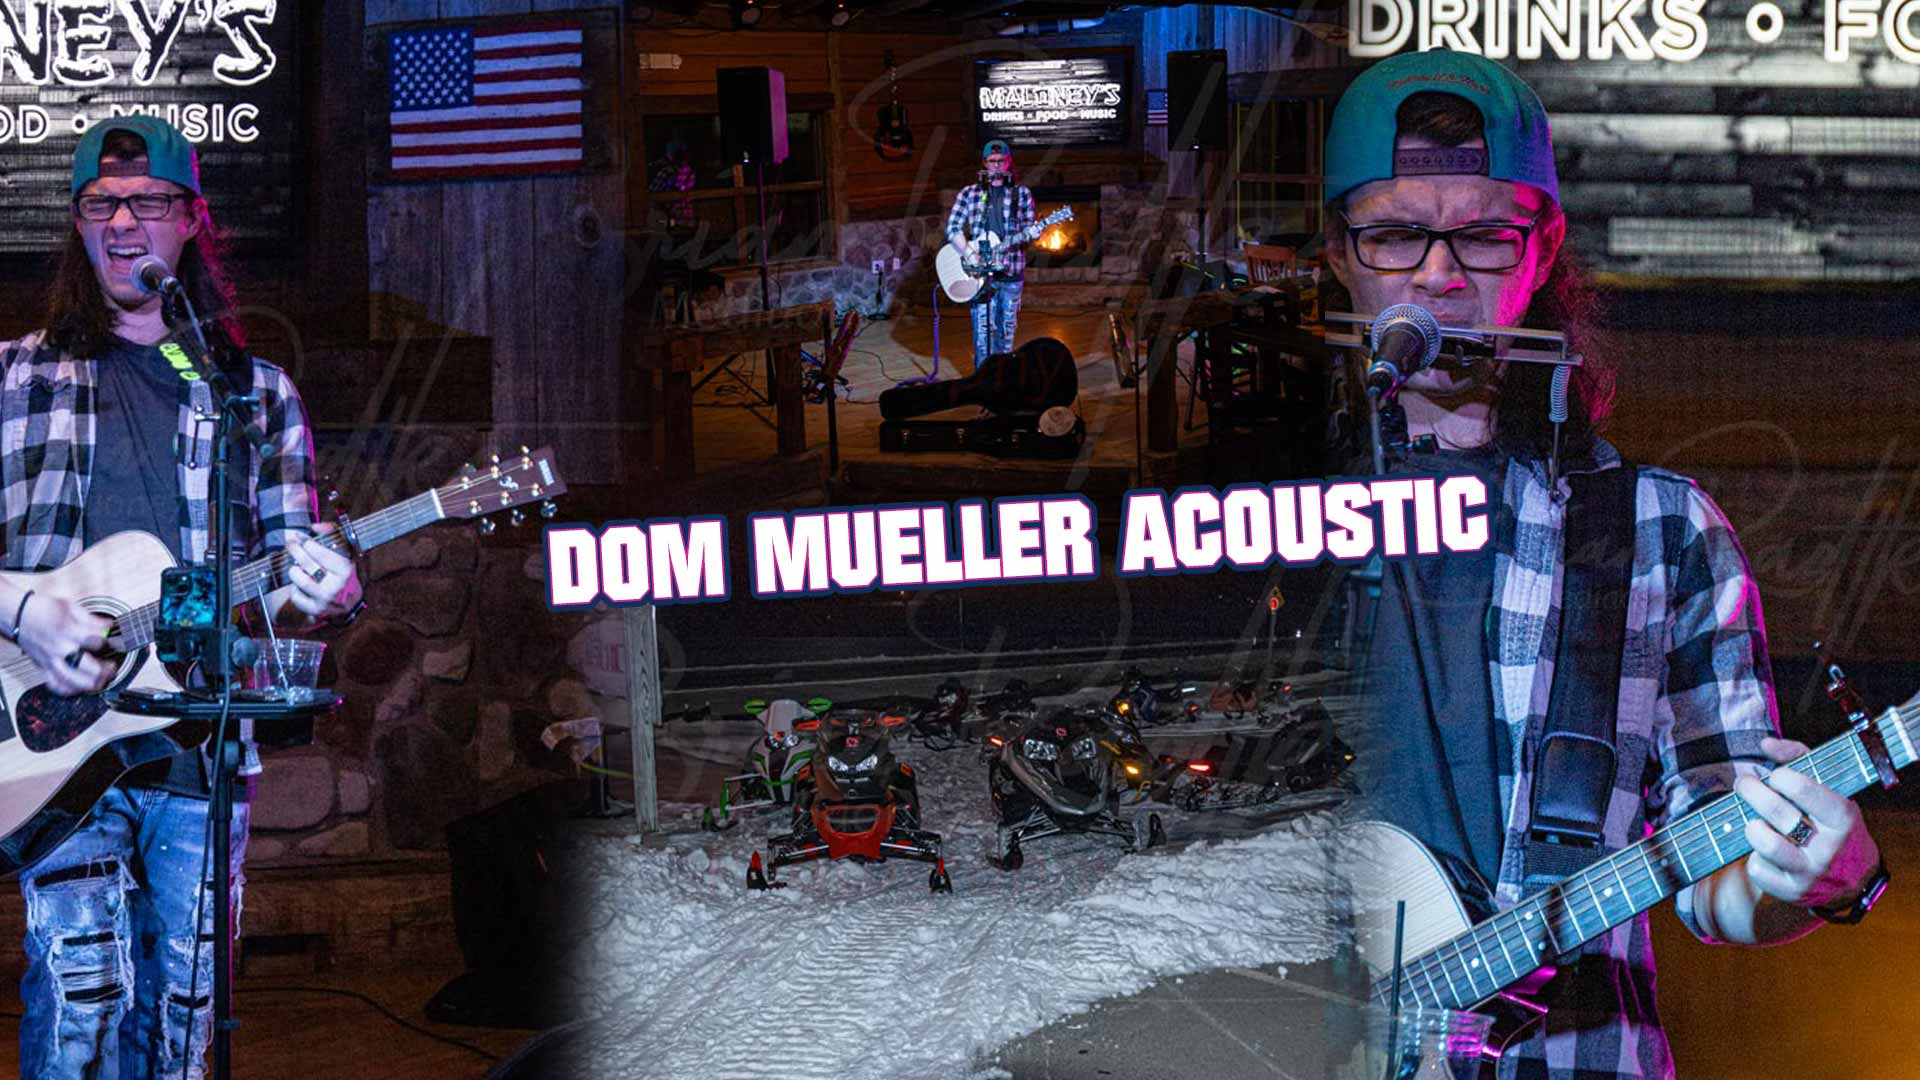 Dom Mueller Acoustic Show at Maloney's